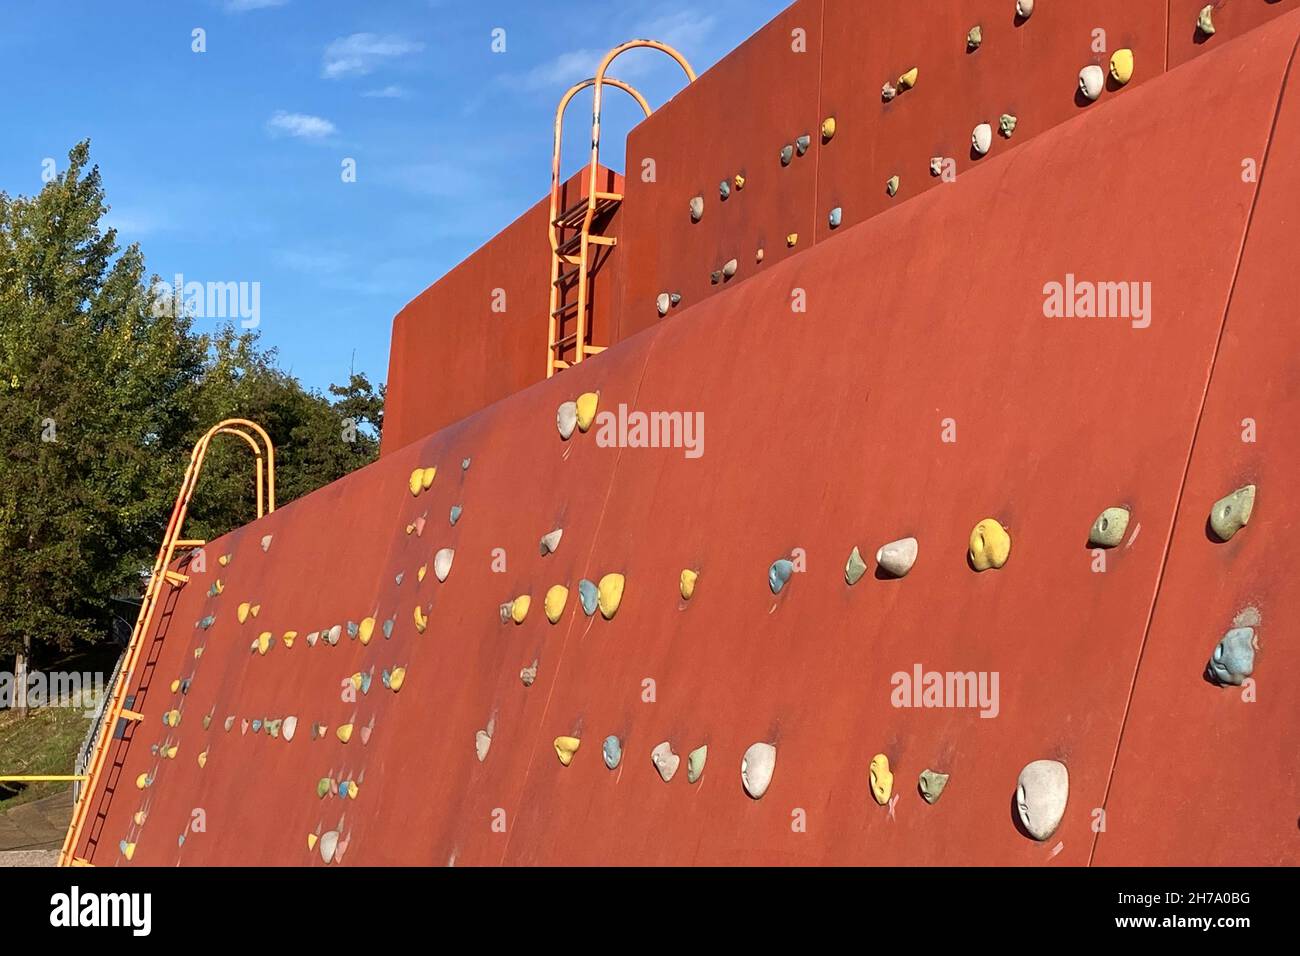 Climbing wall in the Queen Elizabeth Olympic Park, Stratford, London ...